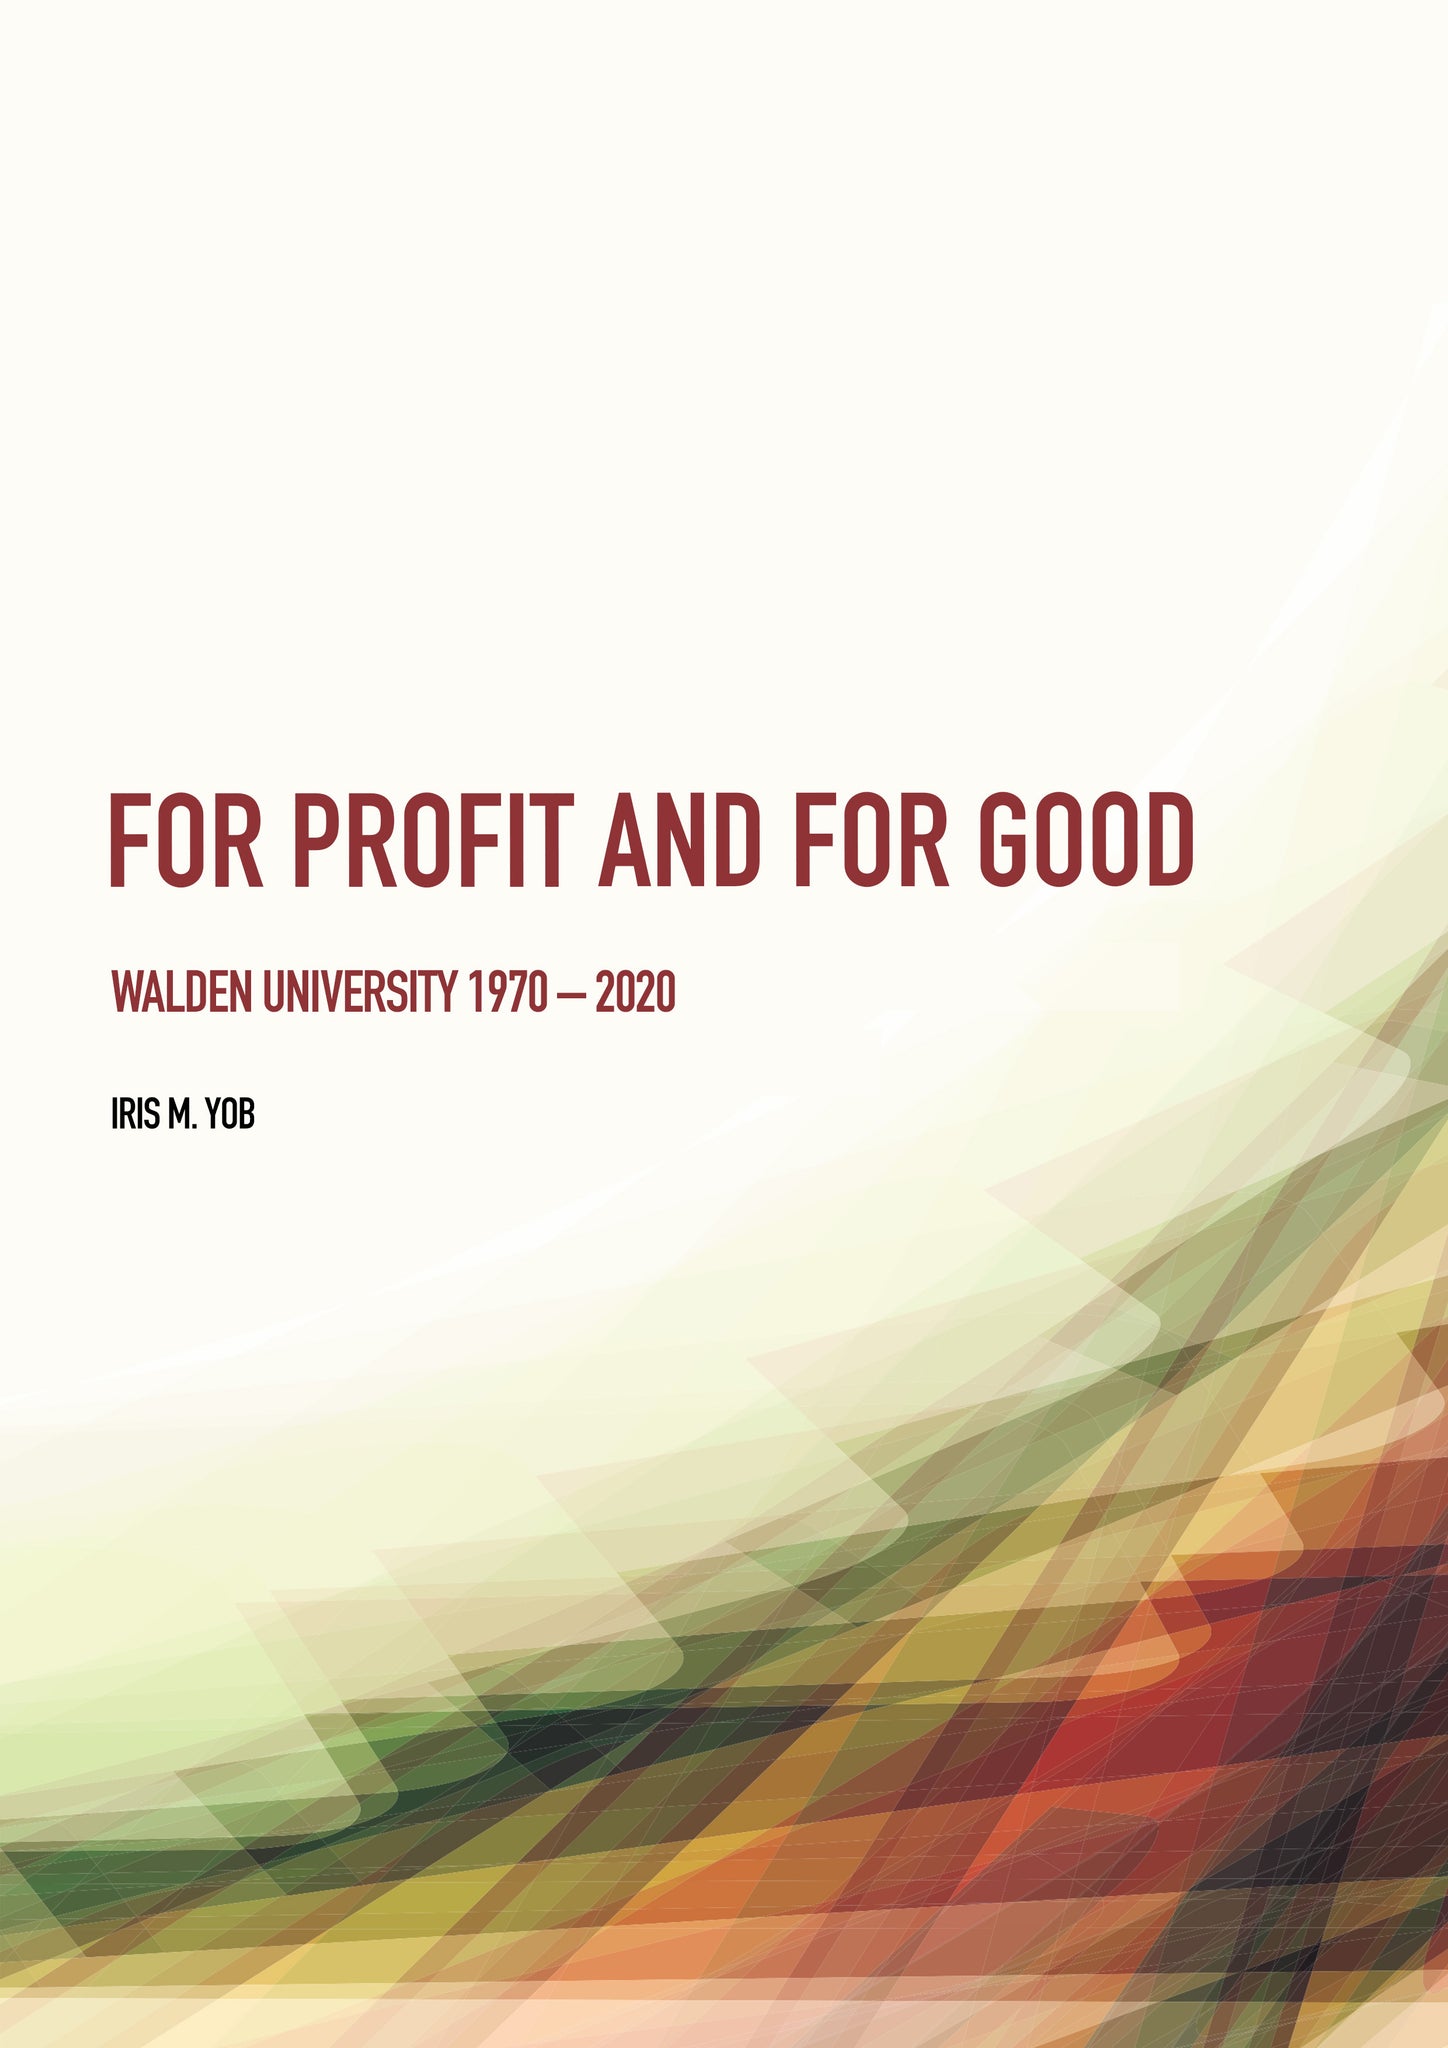 For Profit and For Good: Walden University 1970 – 2020